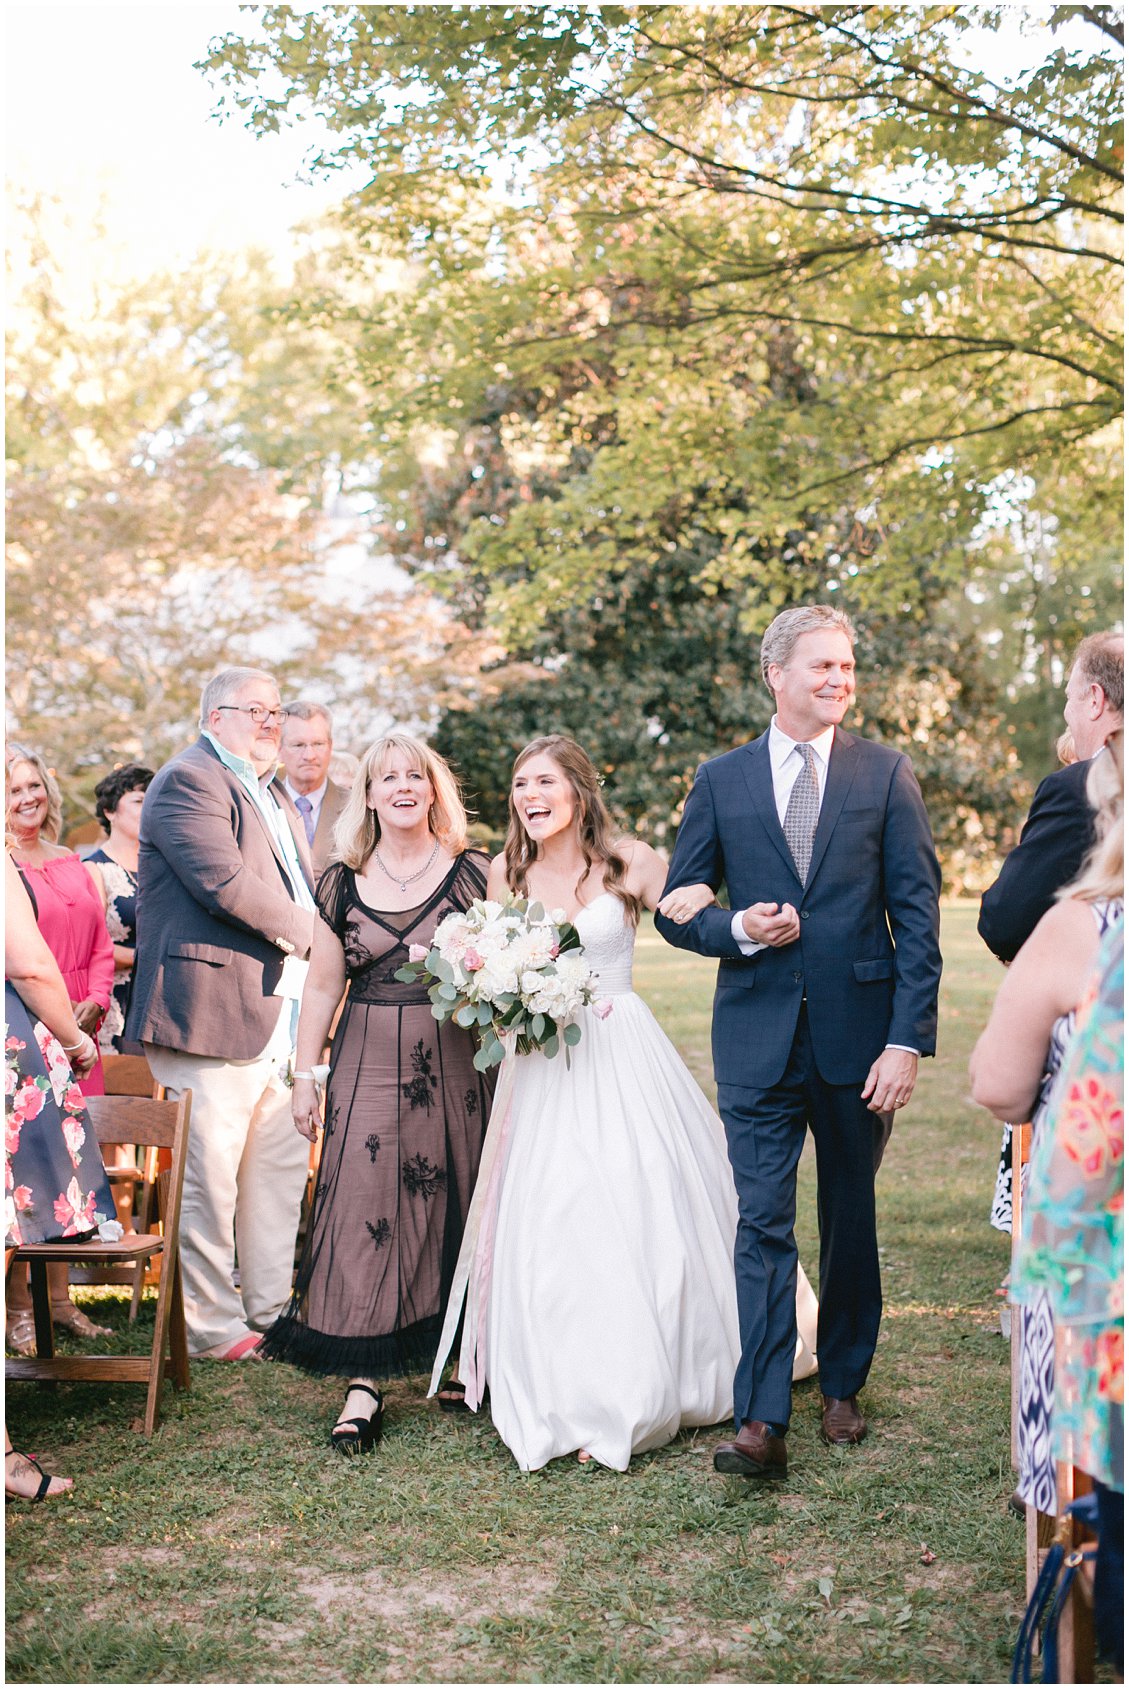 An elegant boho fall wedding at historic Seven Springs Farm & Manor in Richmond Virginia by husband and wife team Pattengale Photography